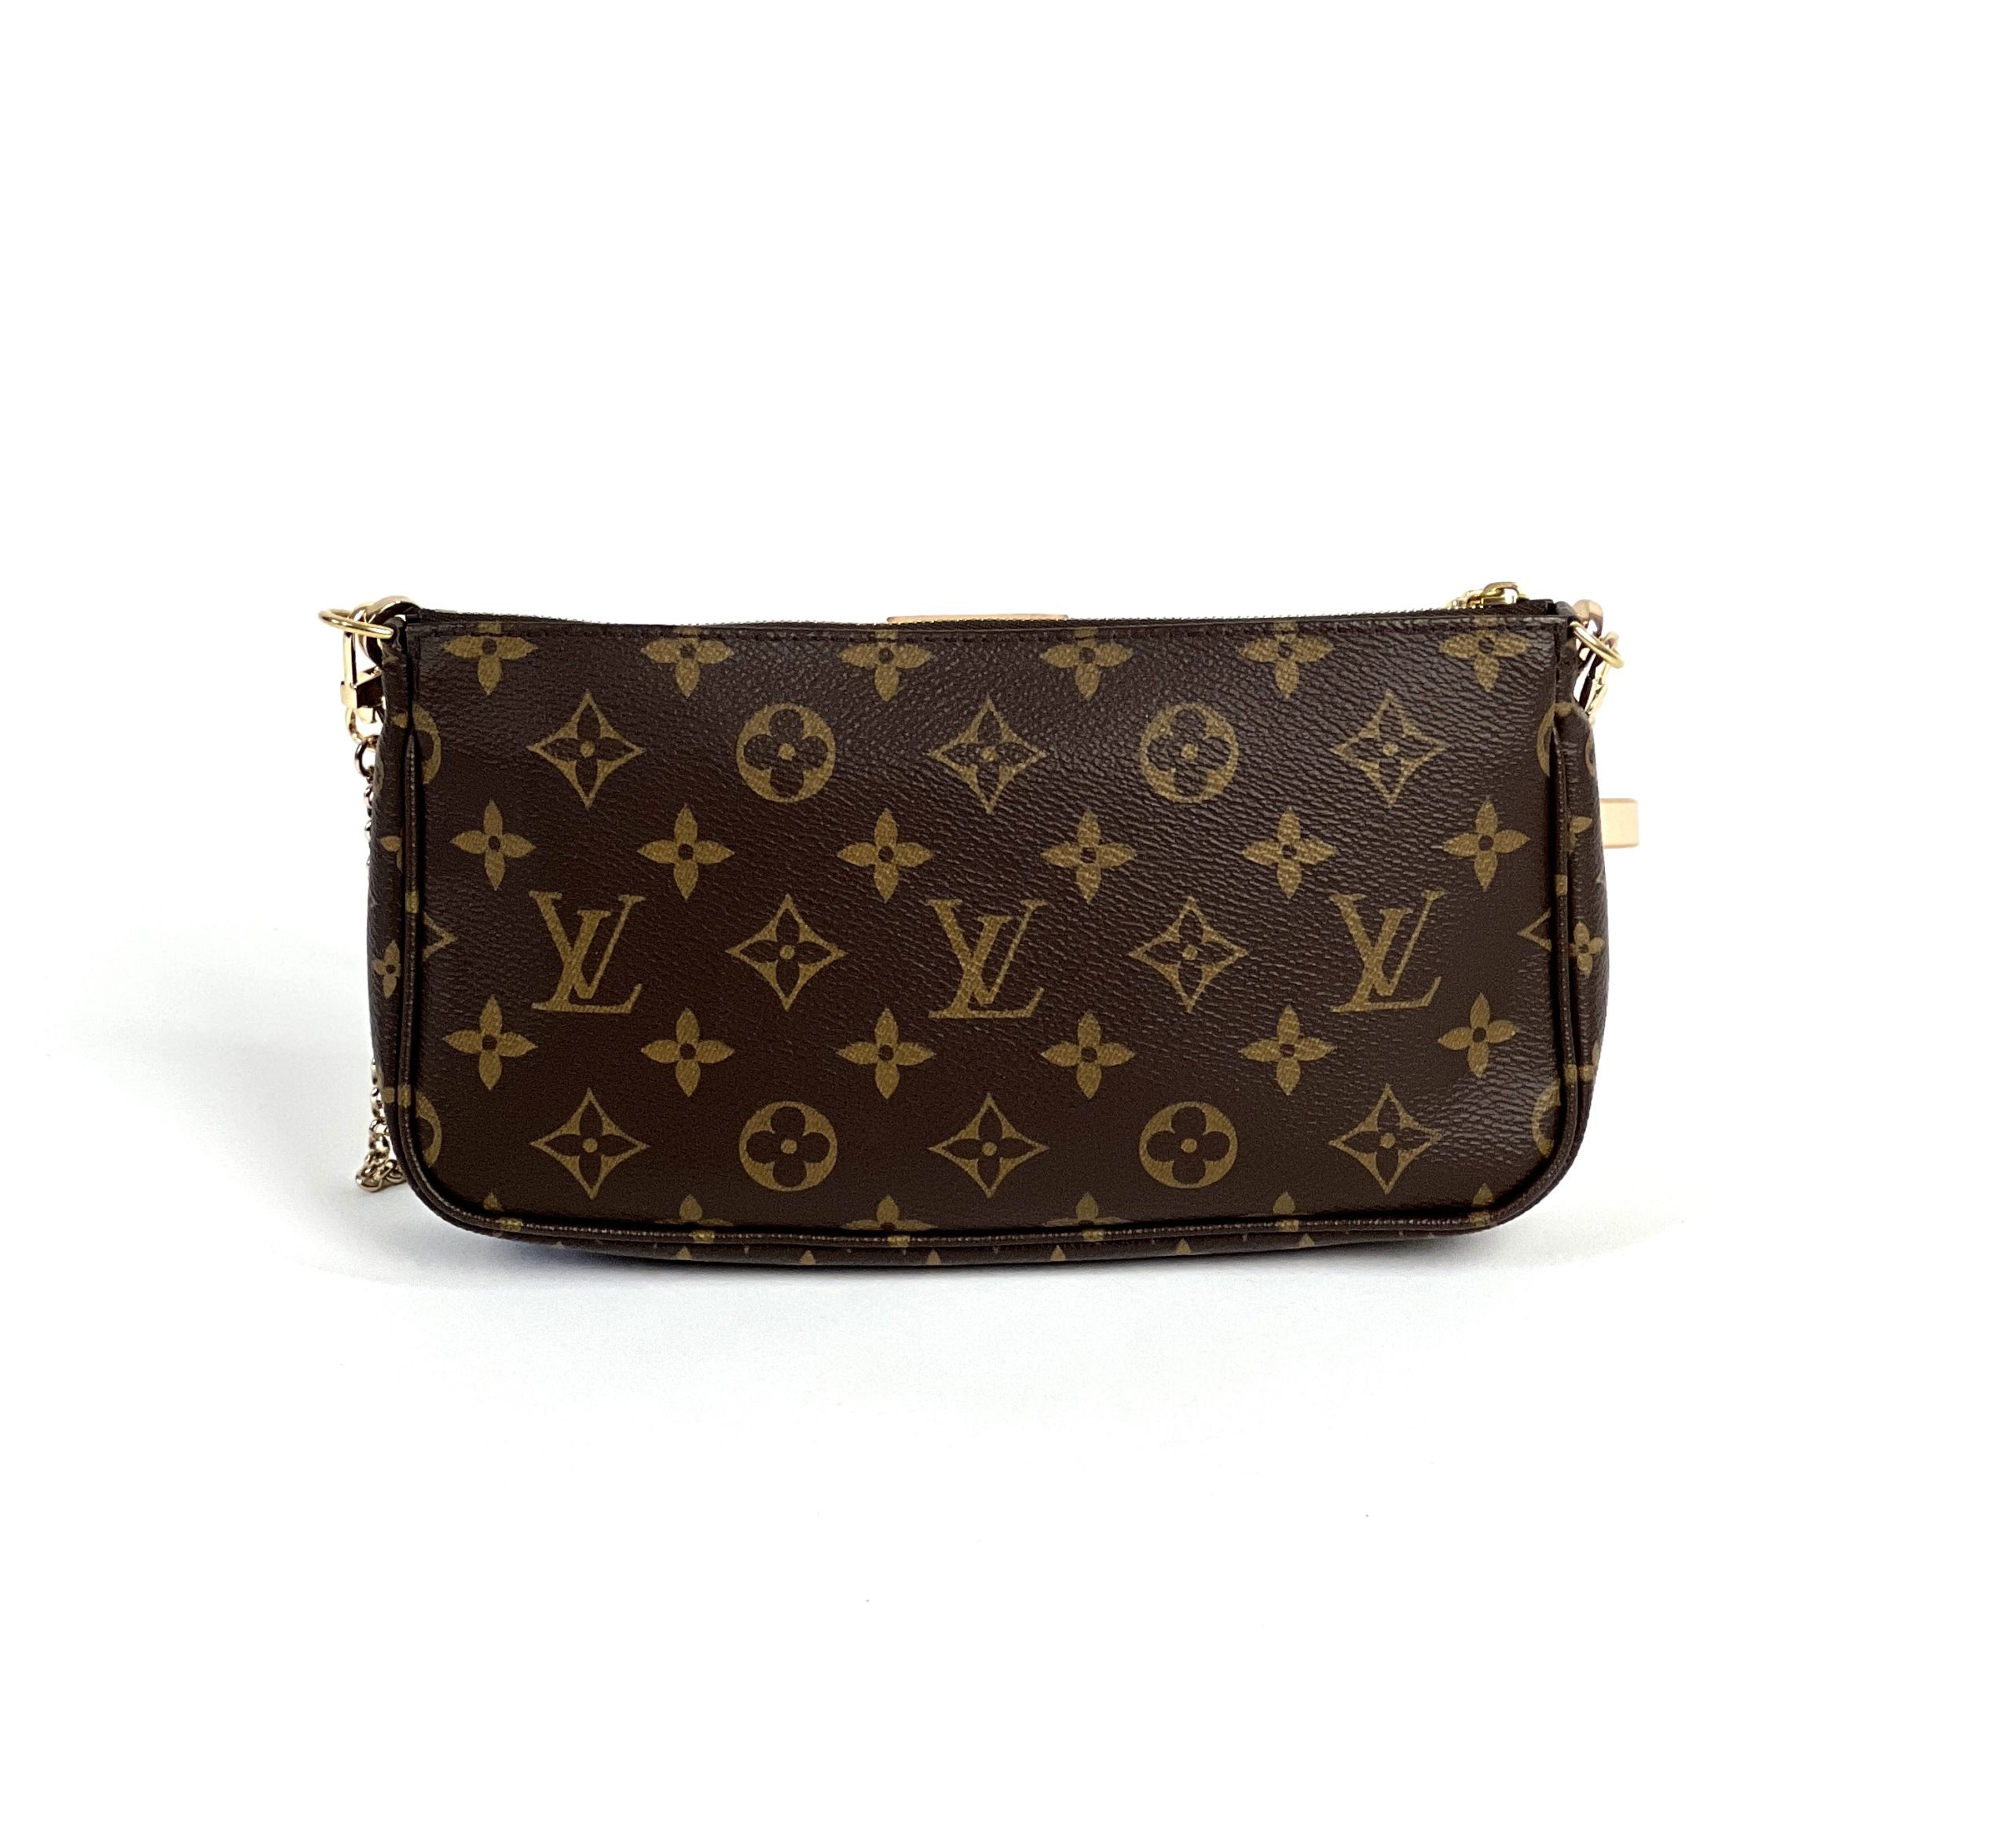 LOUIS VUITTON NEO NOE ACCESSORY YOU NEED!!! (seriously)